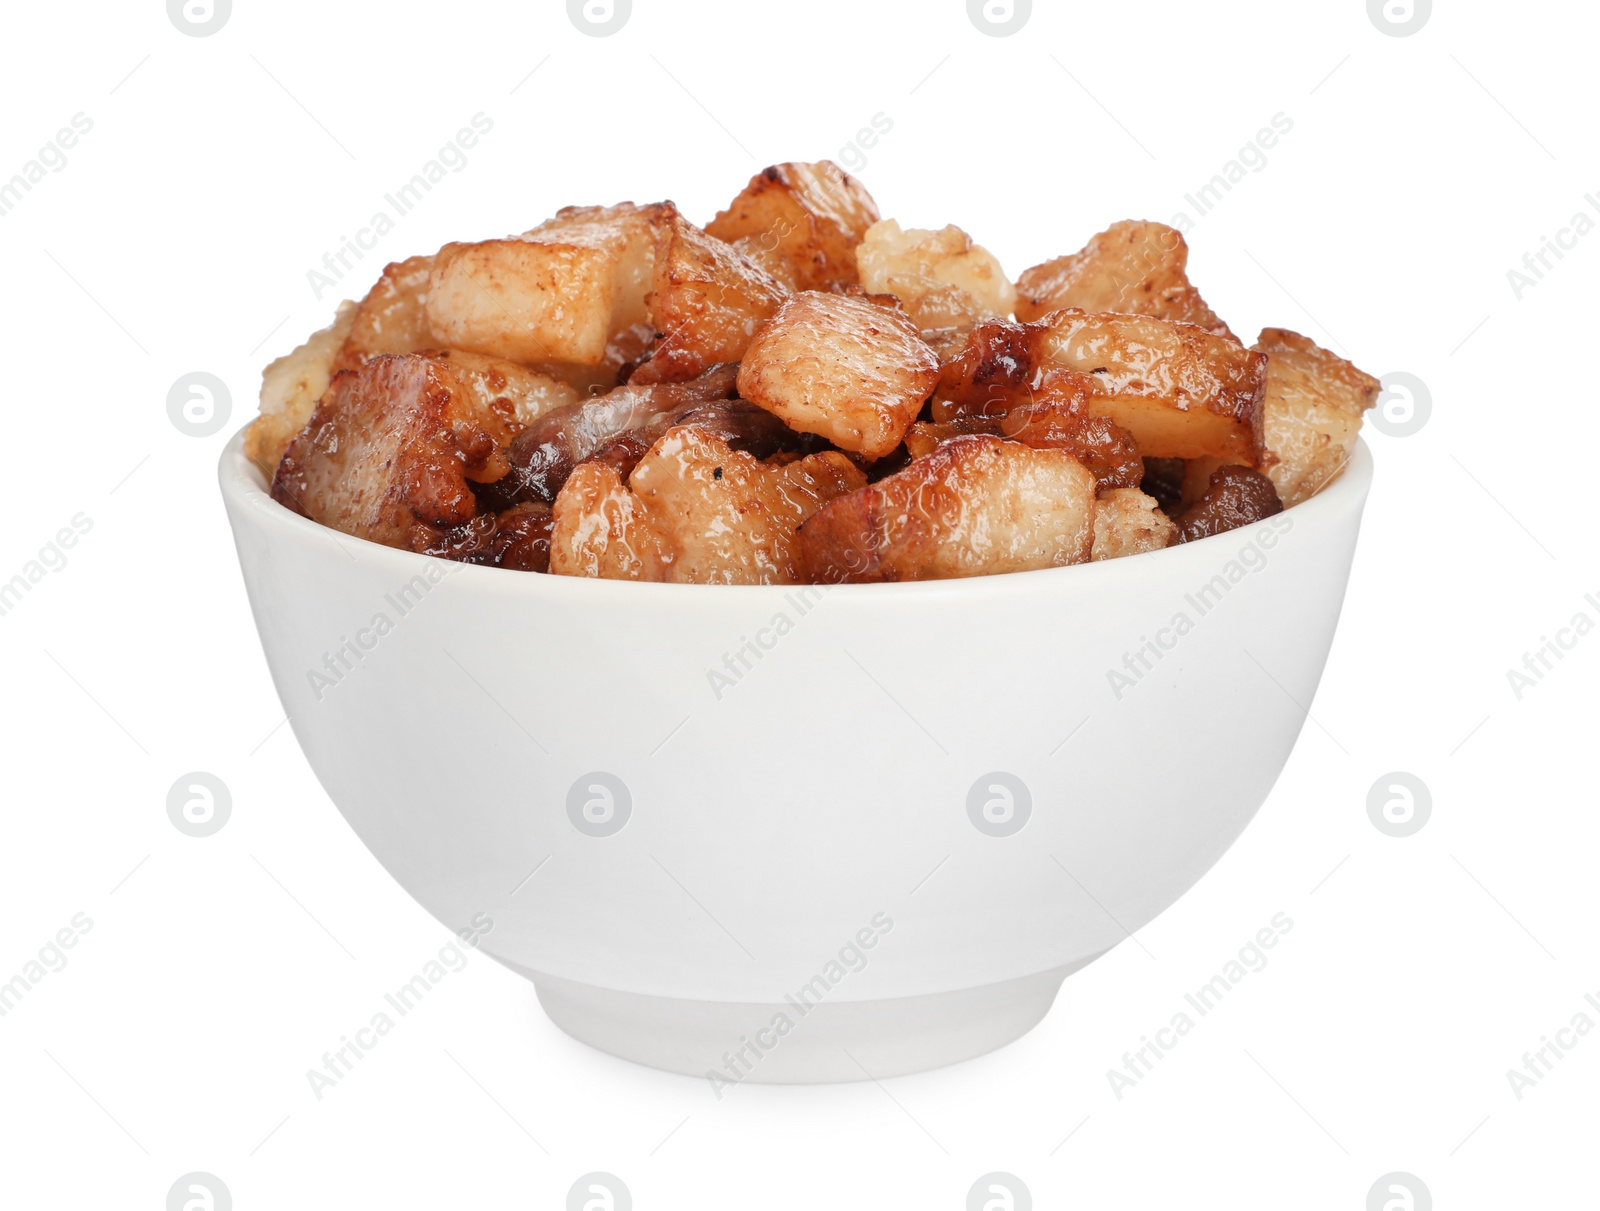 Photo of Tasty fried cracklings in bowl on white background. Cooked pork lard